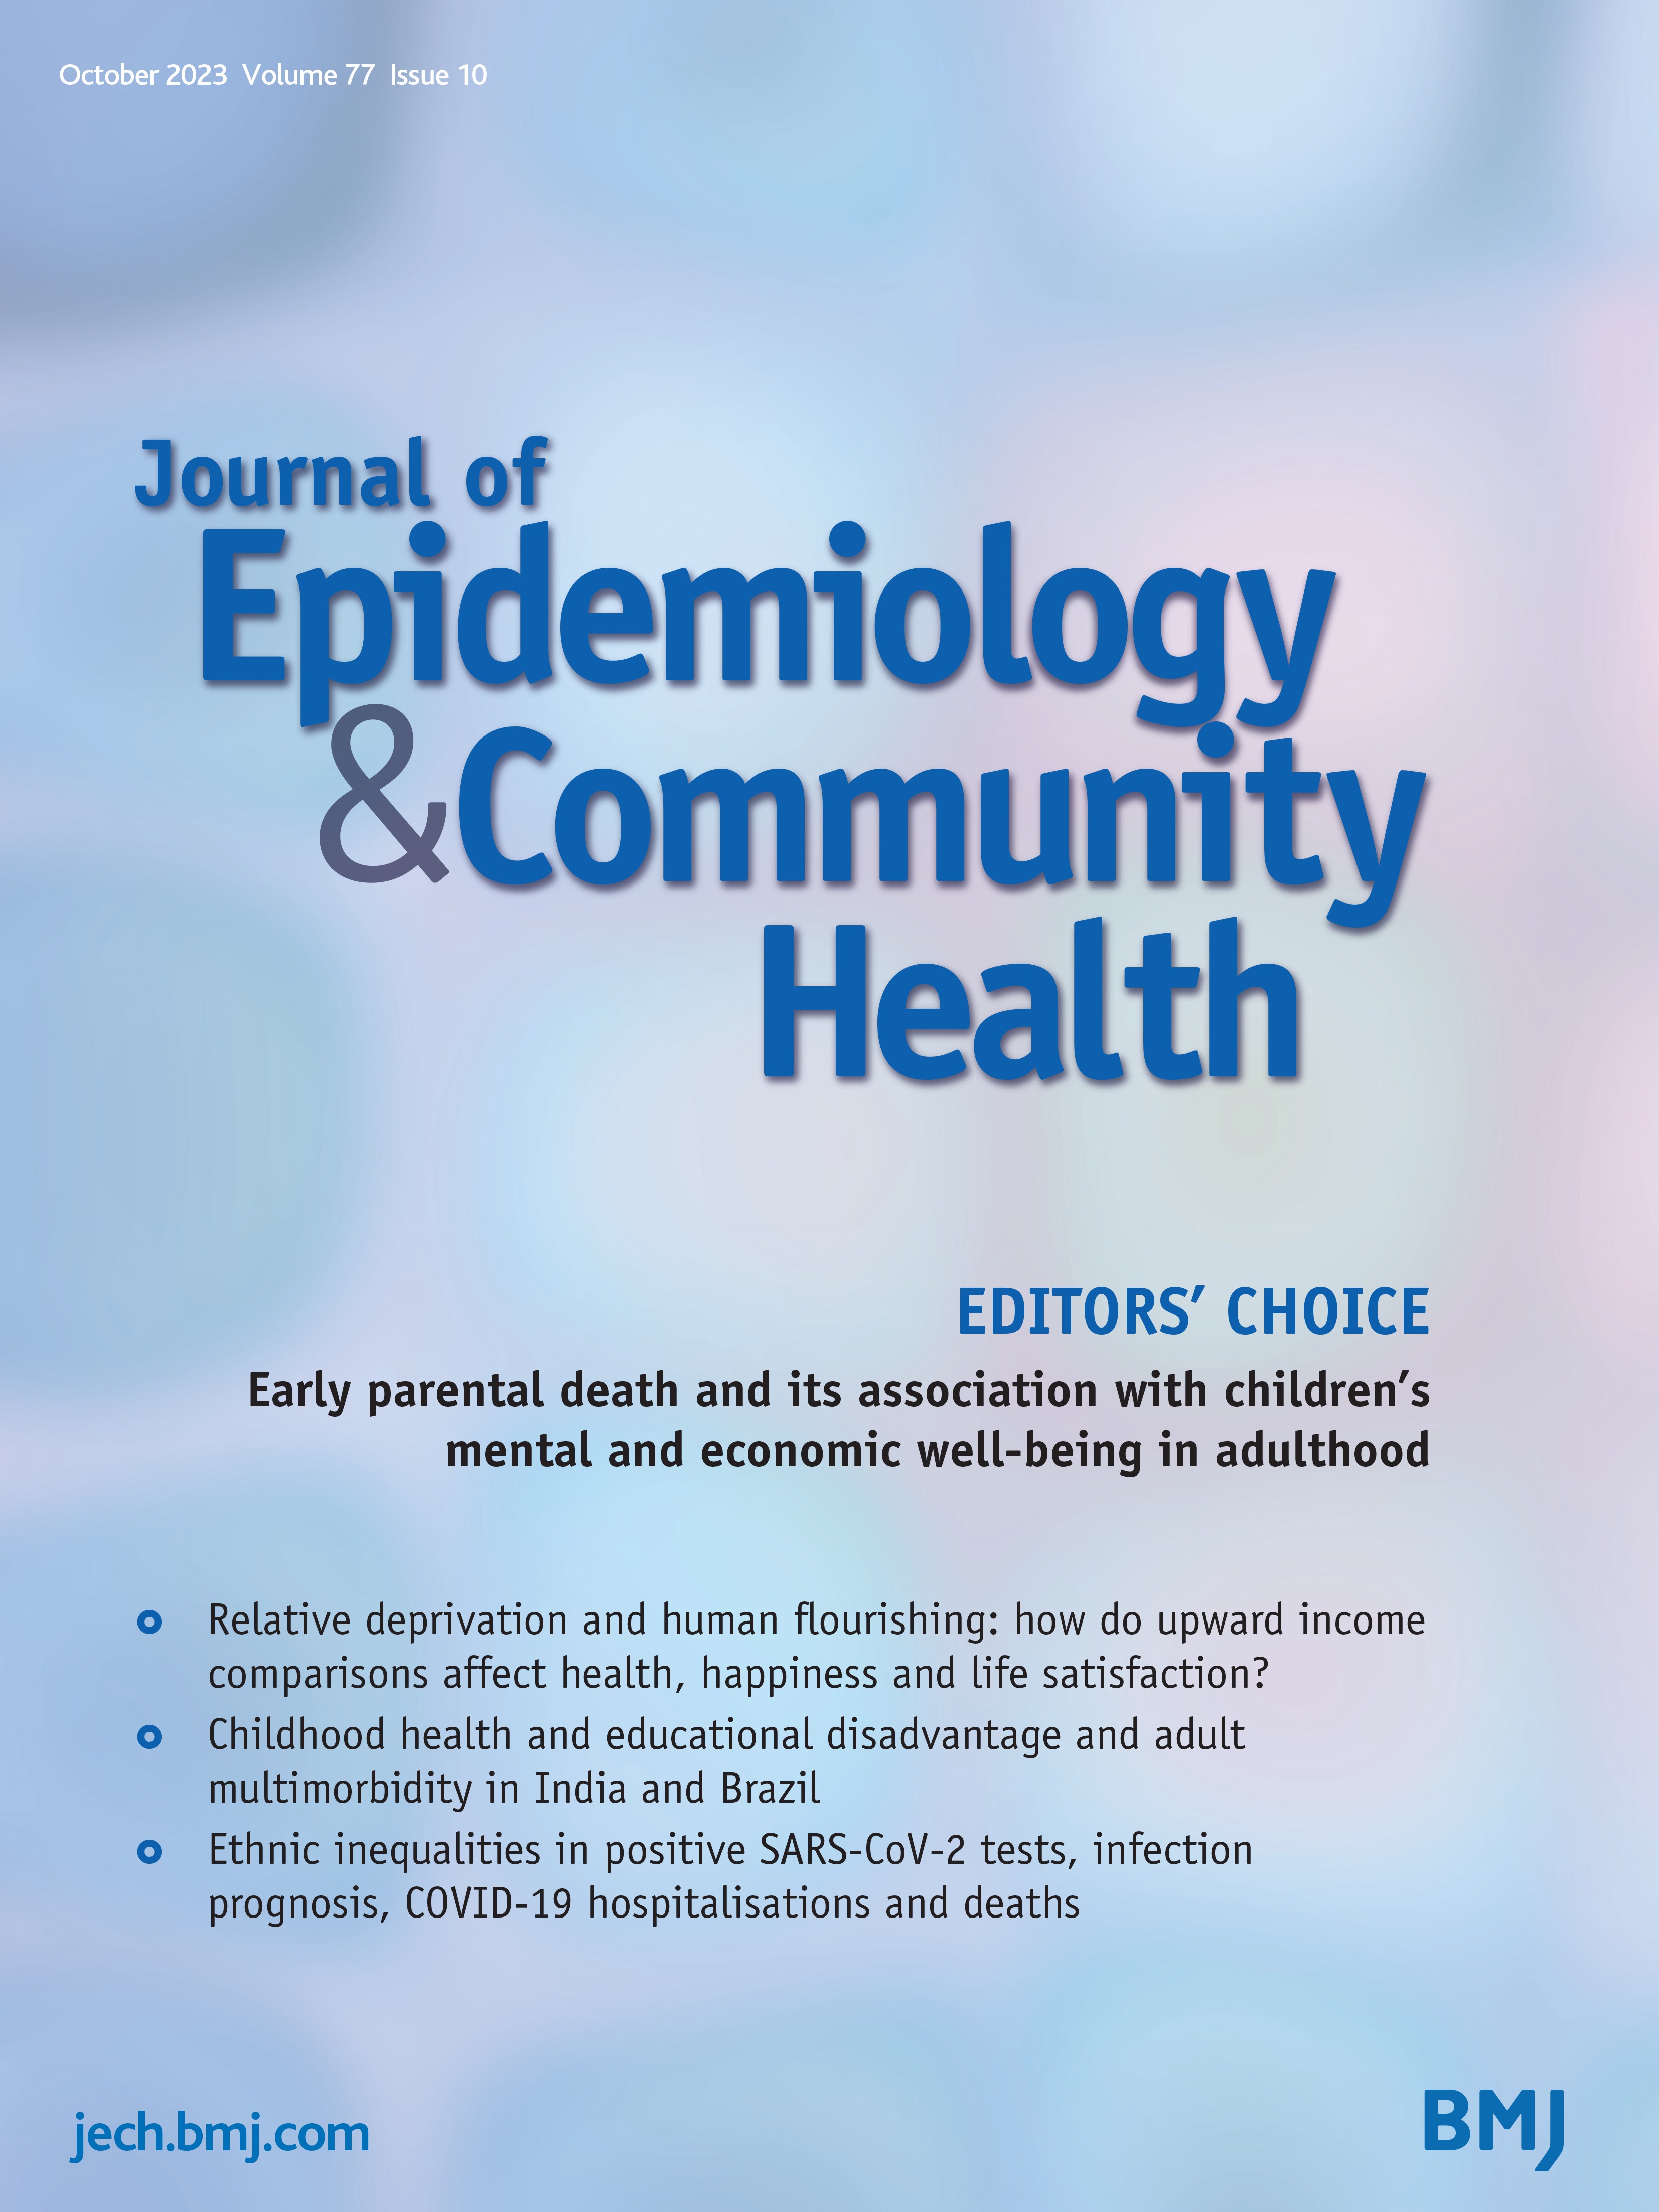 Childhood health and educational disadvantage are associated with adult multimorbidity in the global south: findings from a cross-sectional analysis of nationally representative surveys in India and Brazil